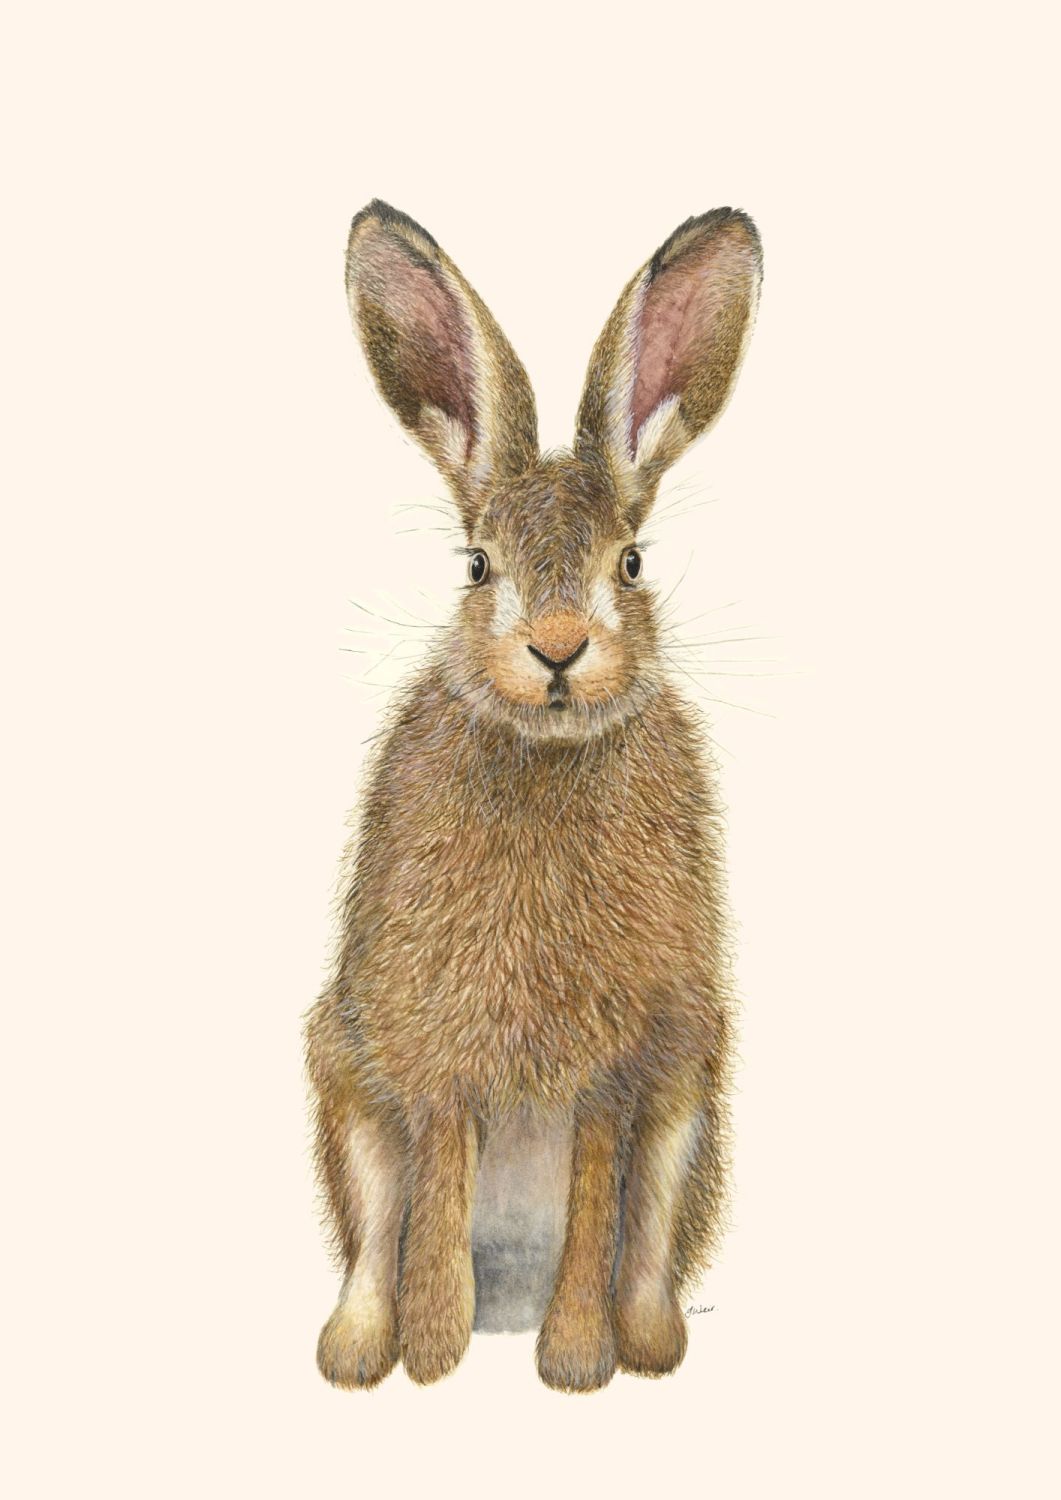 Waiting Hare, A4 size print.